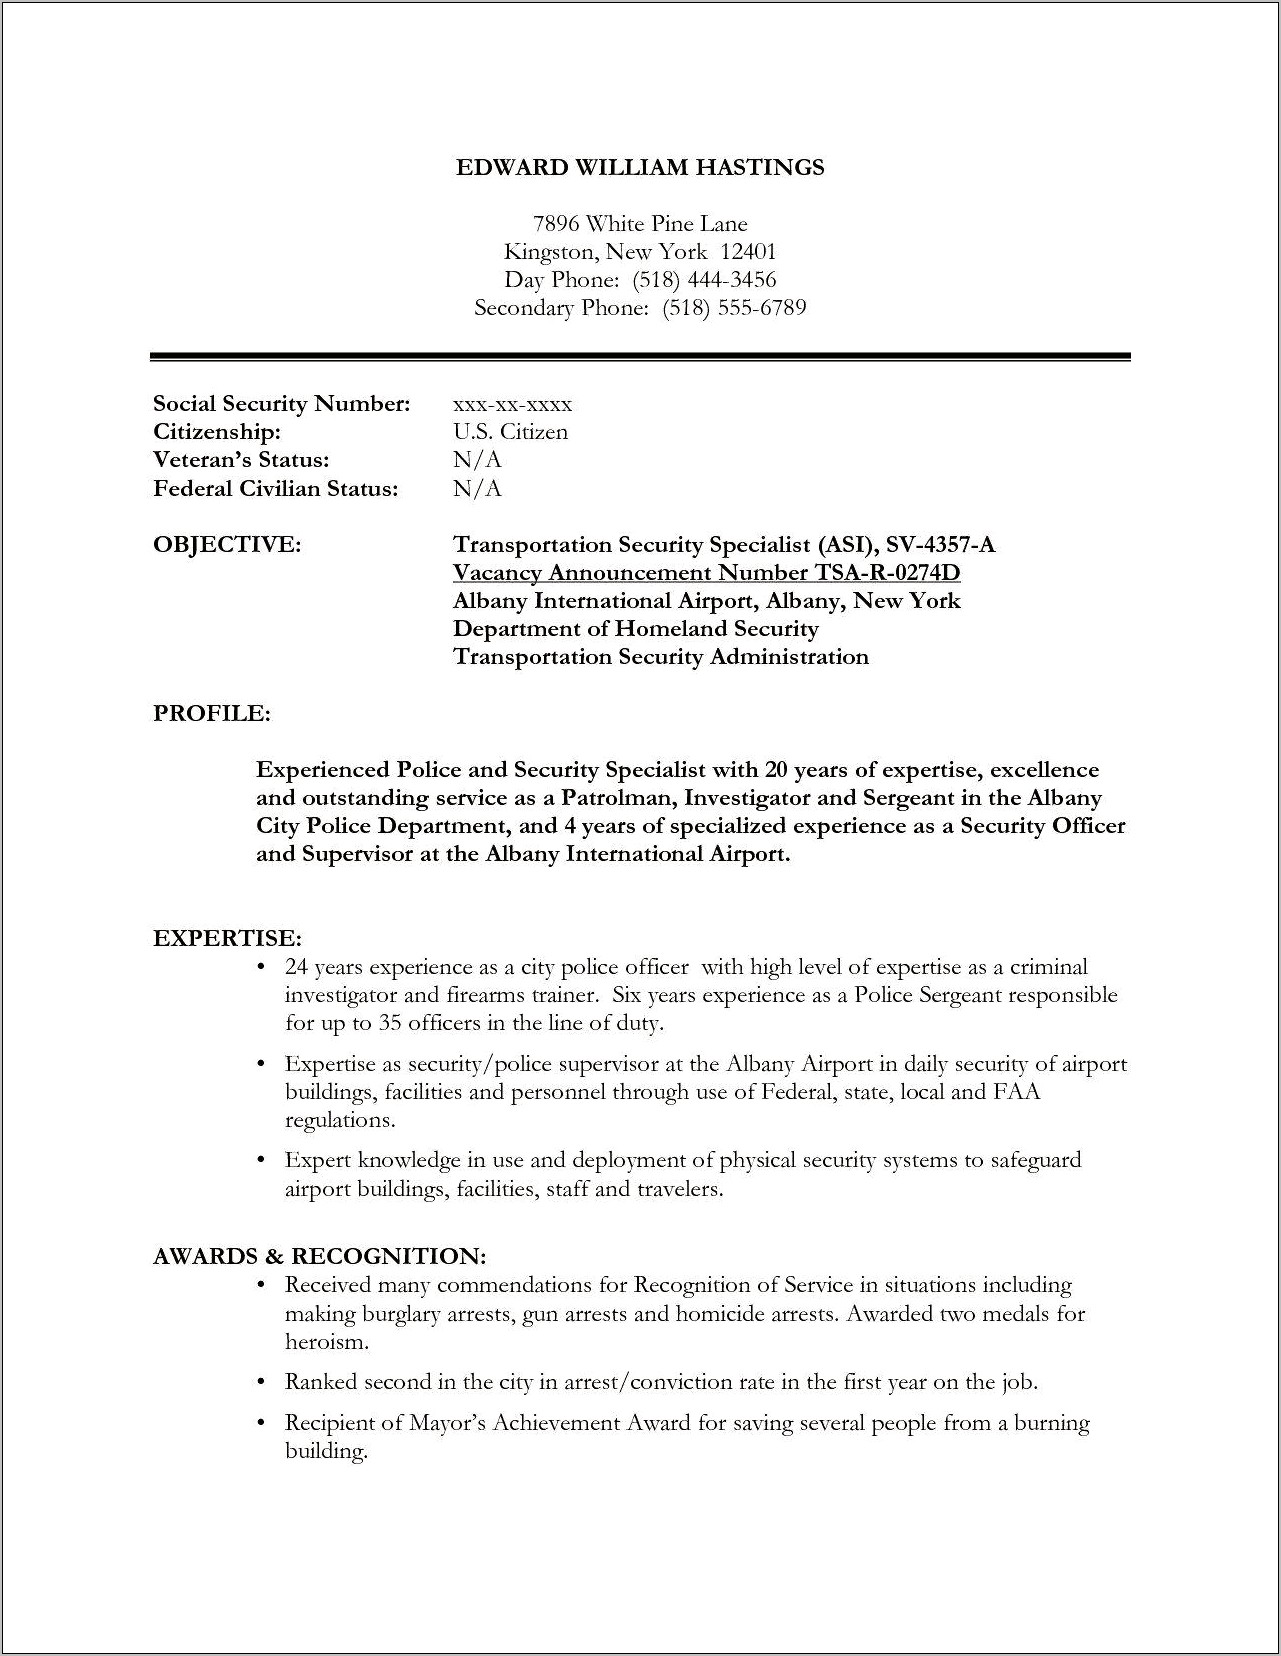 Resume Sample Of Home Land Security